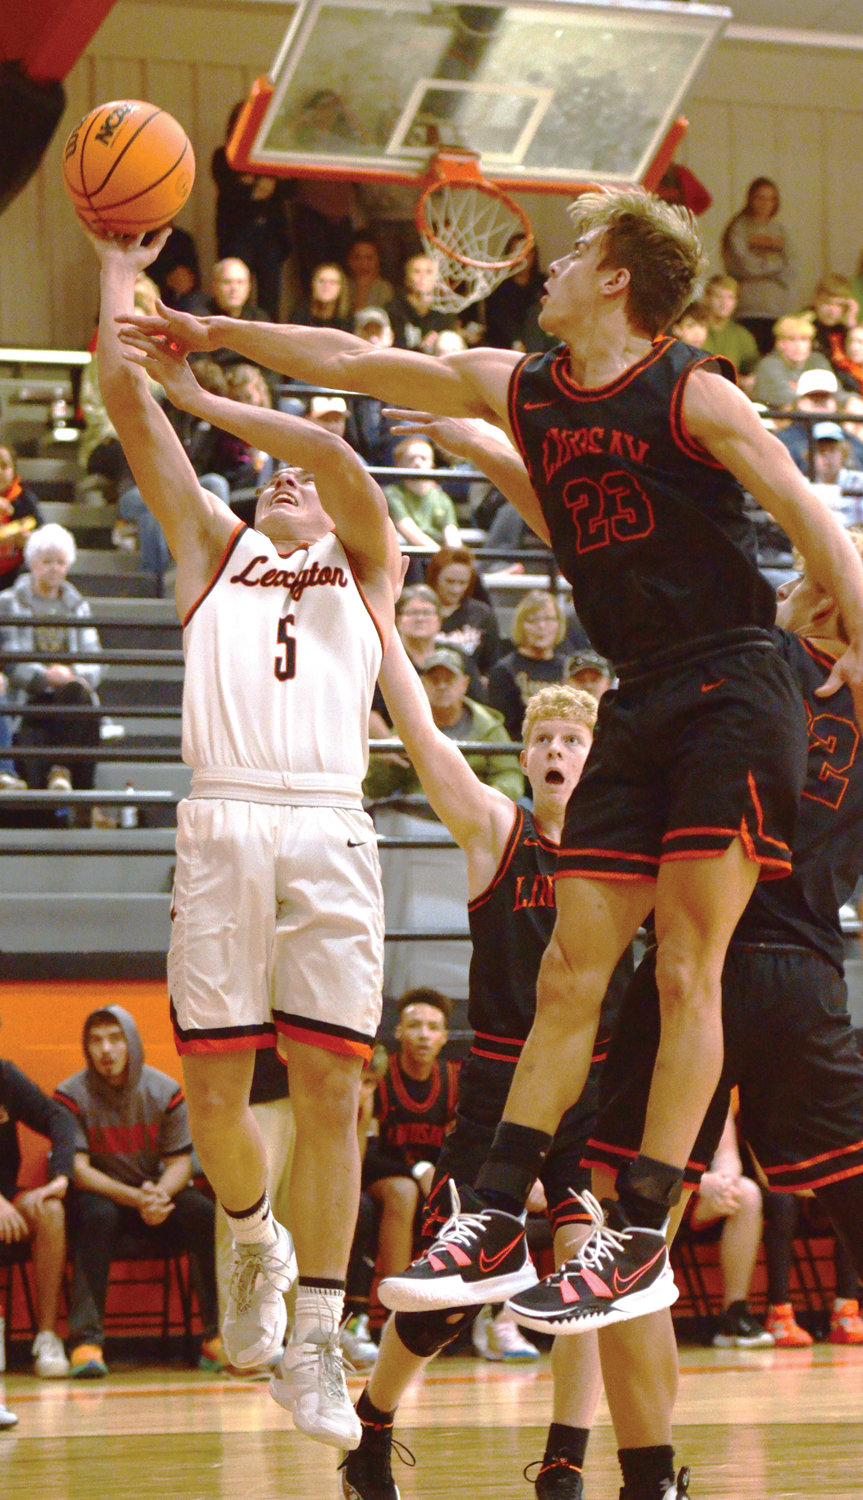 Lexington senior Heath Winterton shoots a layup in the paint during the Bulldogs’ game against Lindsay. Lexington fell to the Leopards 42-34. Winterton scored three points.